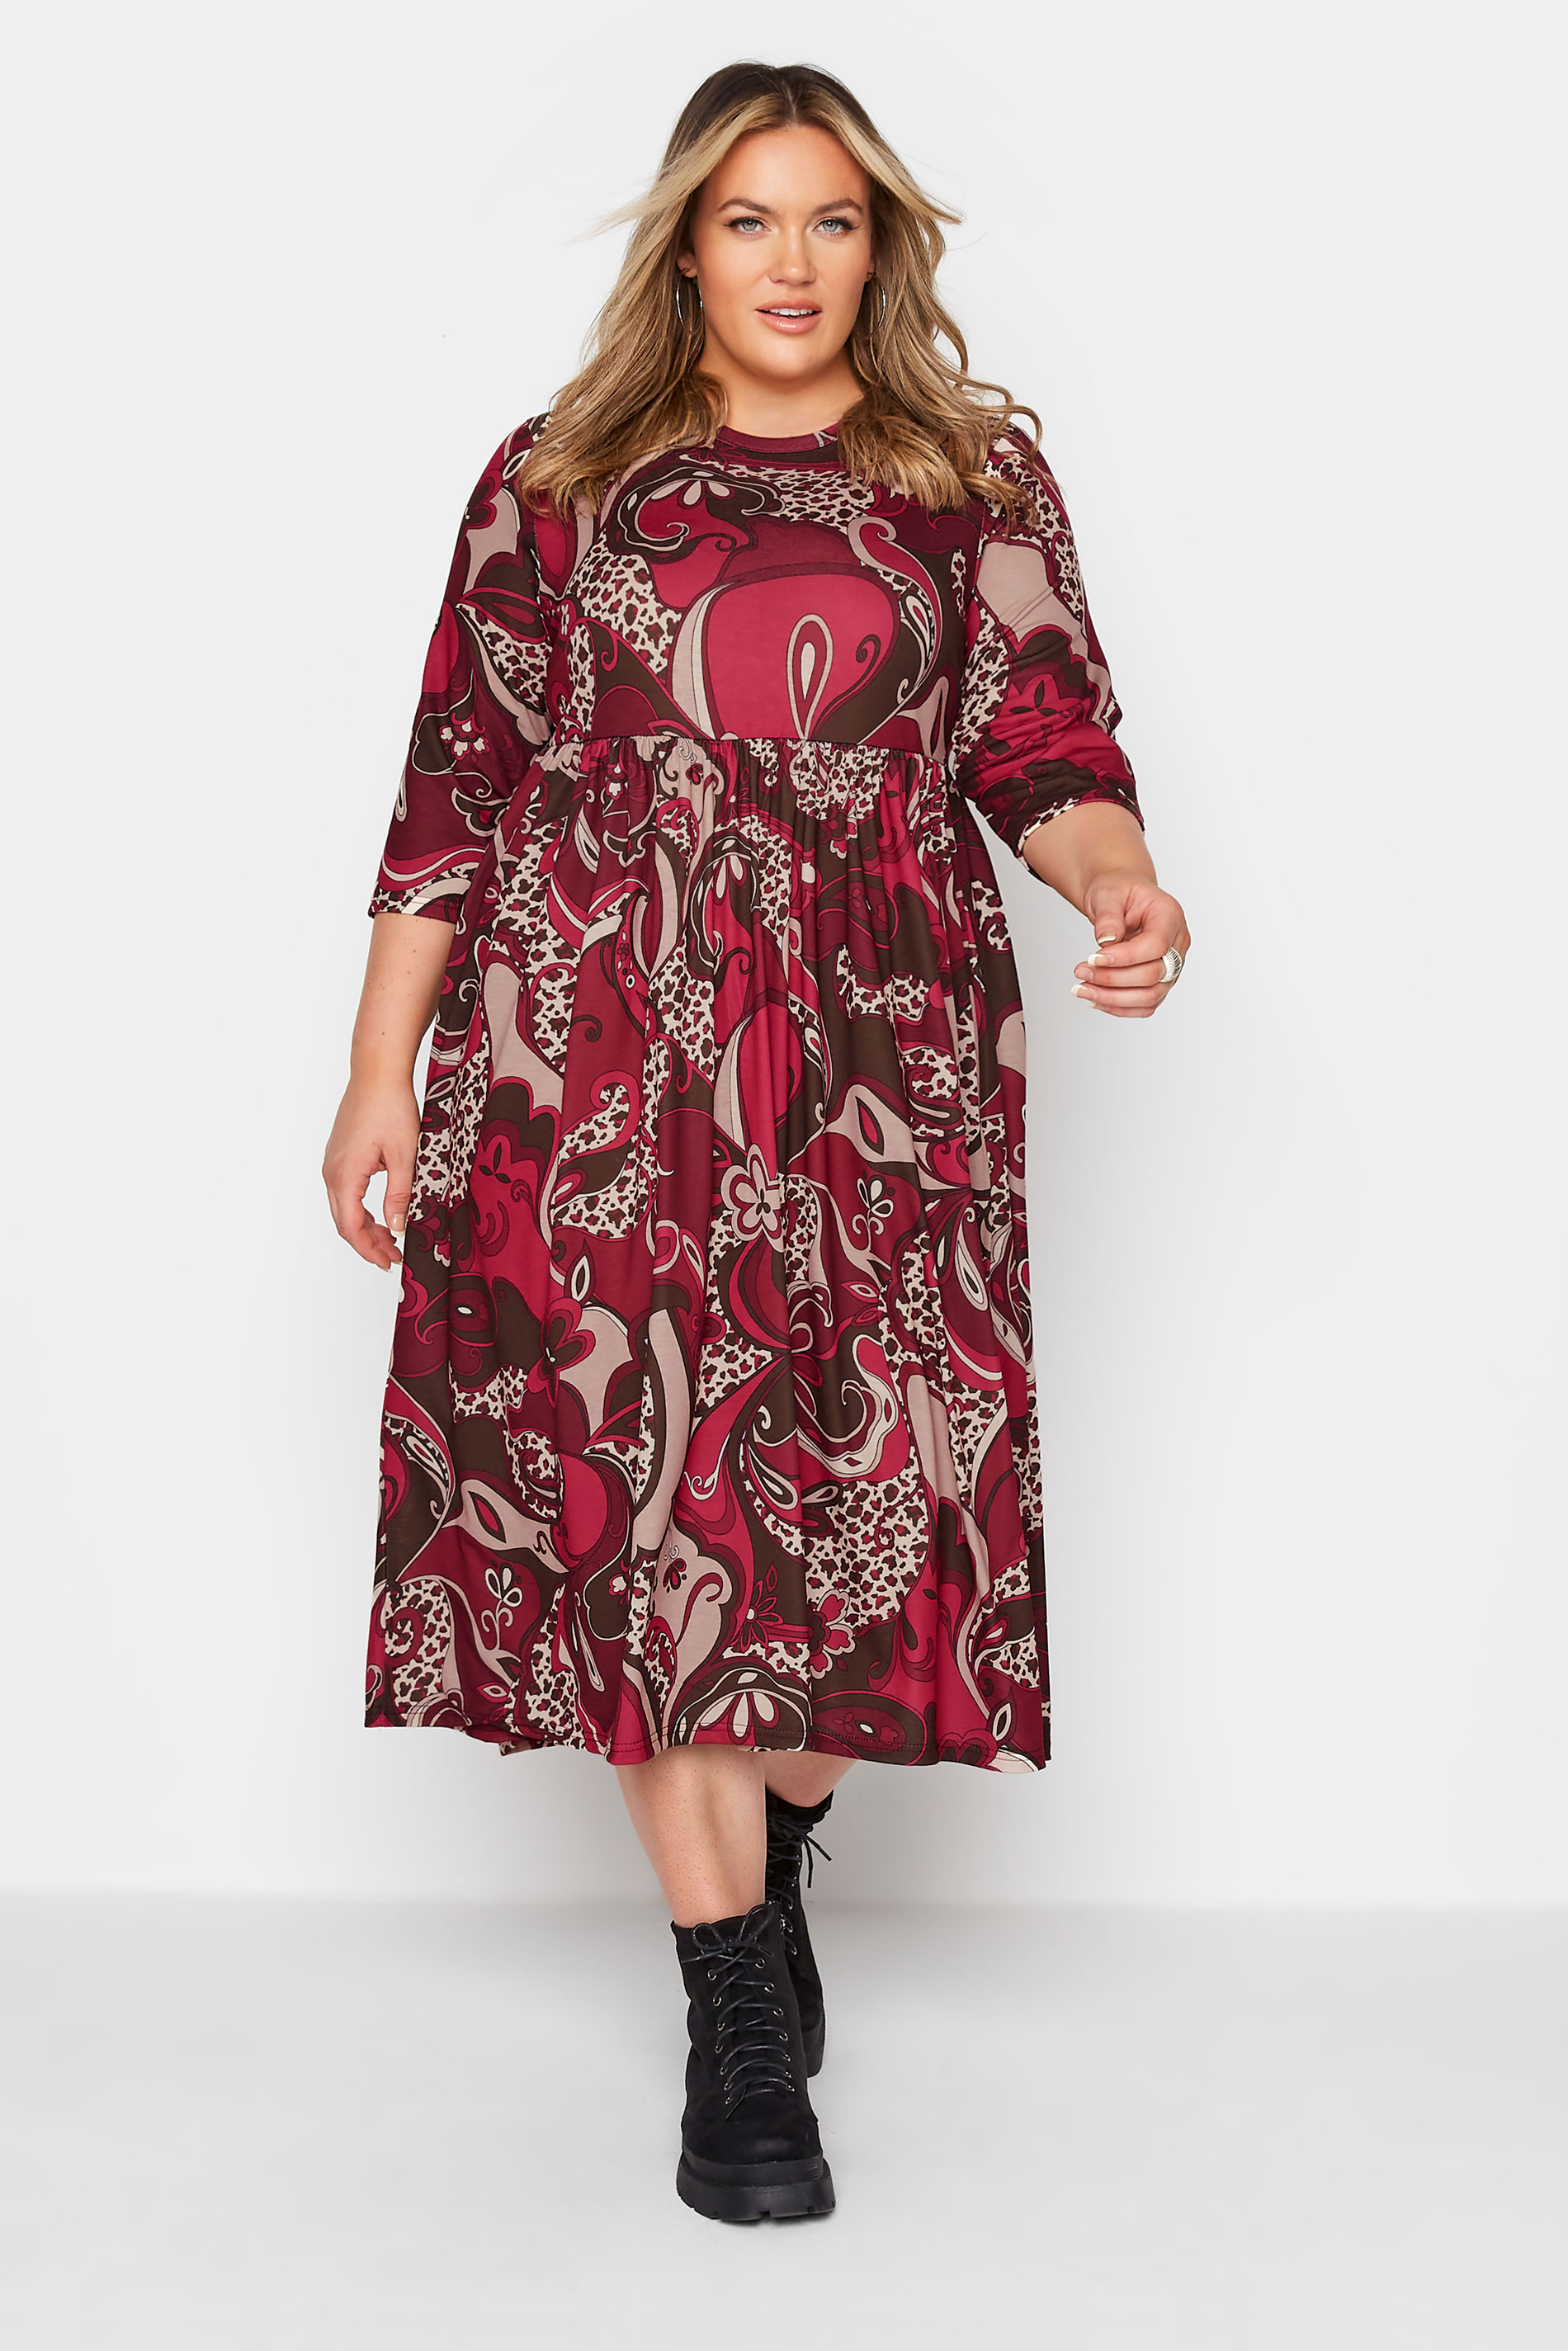 LIMITED COLLECTION Red Paisley Print Midaxi Dress_A.jpg